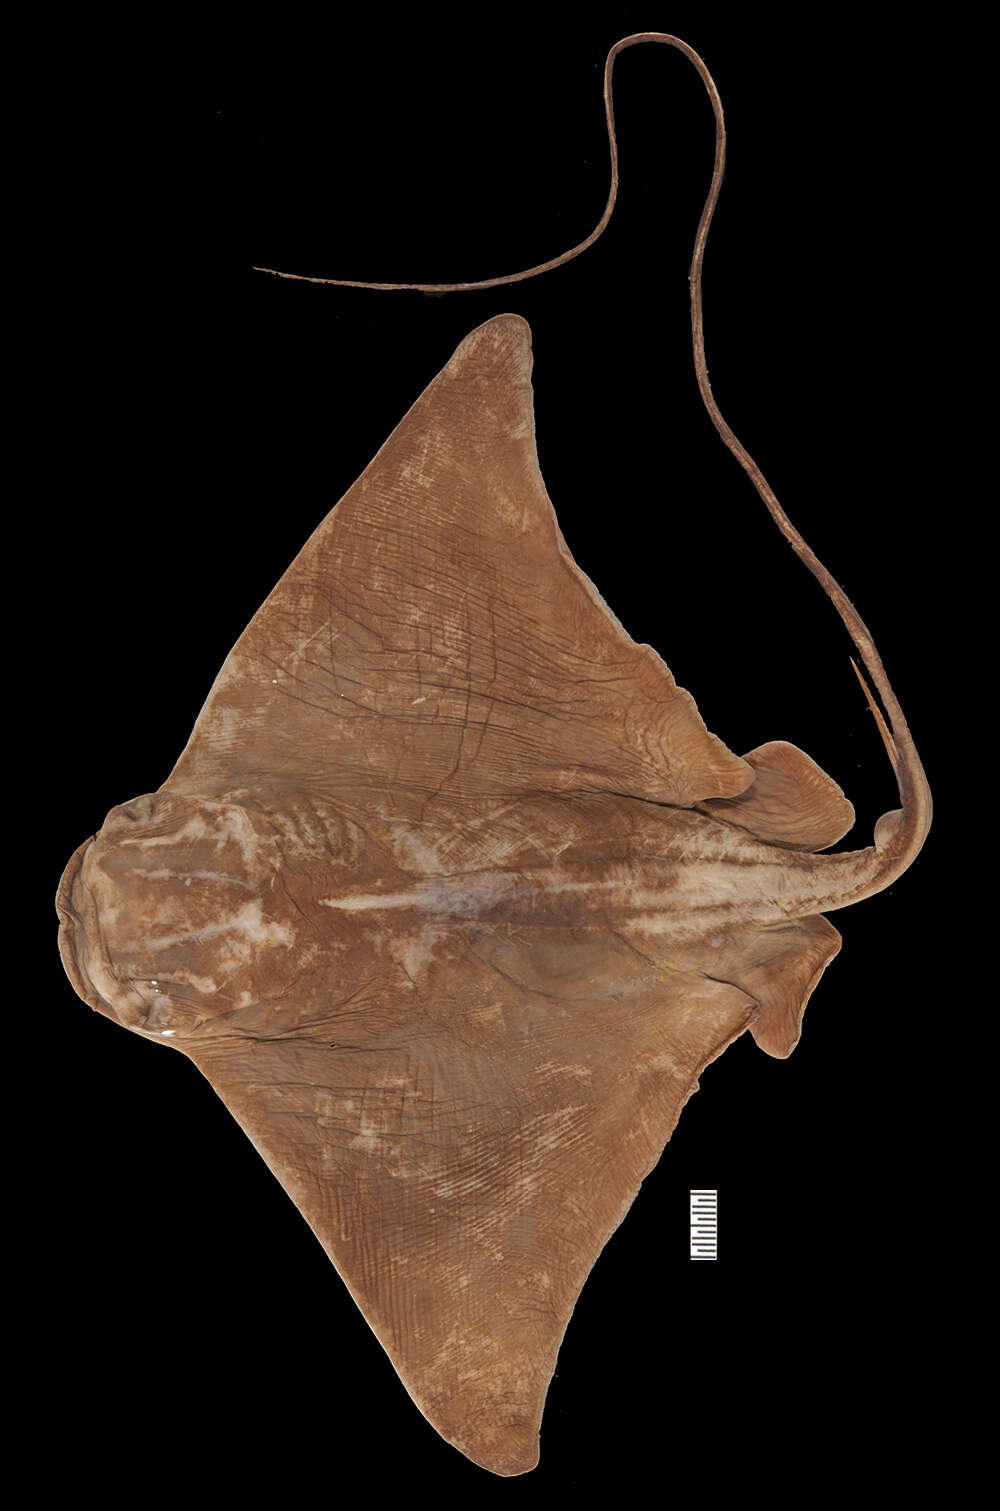 Image of Blue-nosed ray